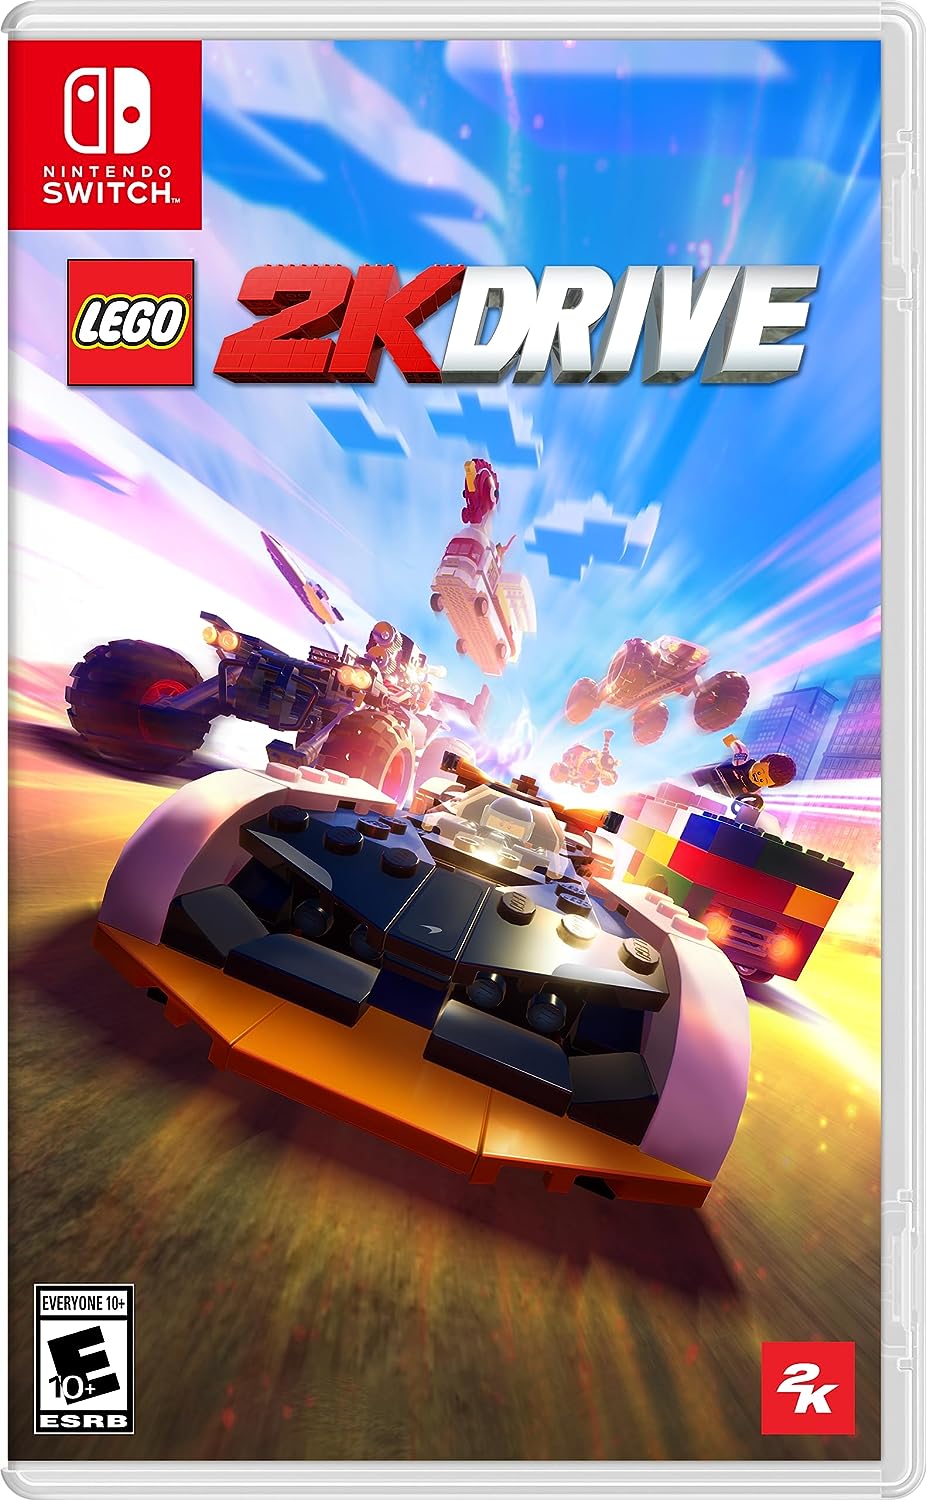 LEGO 2K Drive w/ 3-in-1 Aquadirt Racer LEGO Set (Nintendo Switch, PS4 or Xbox One) $40 + Free Shipping